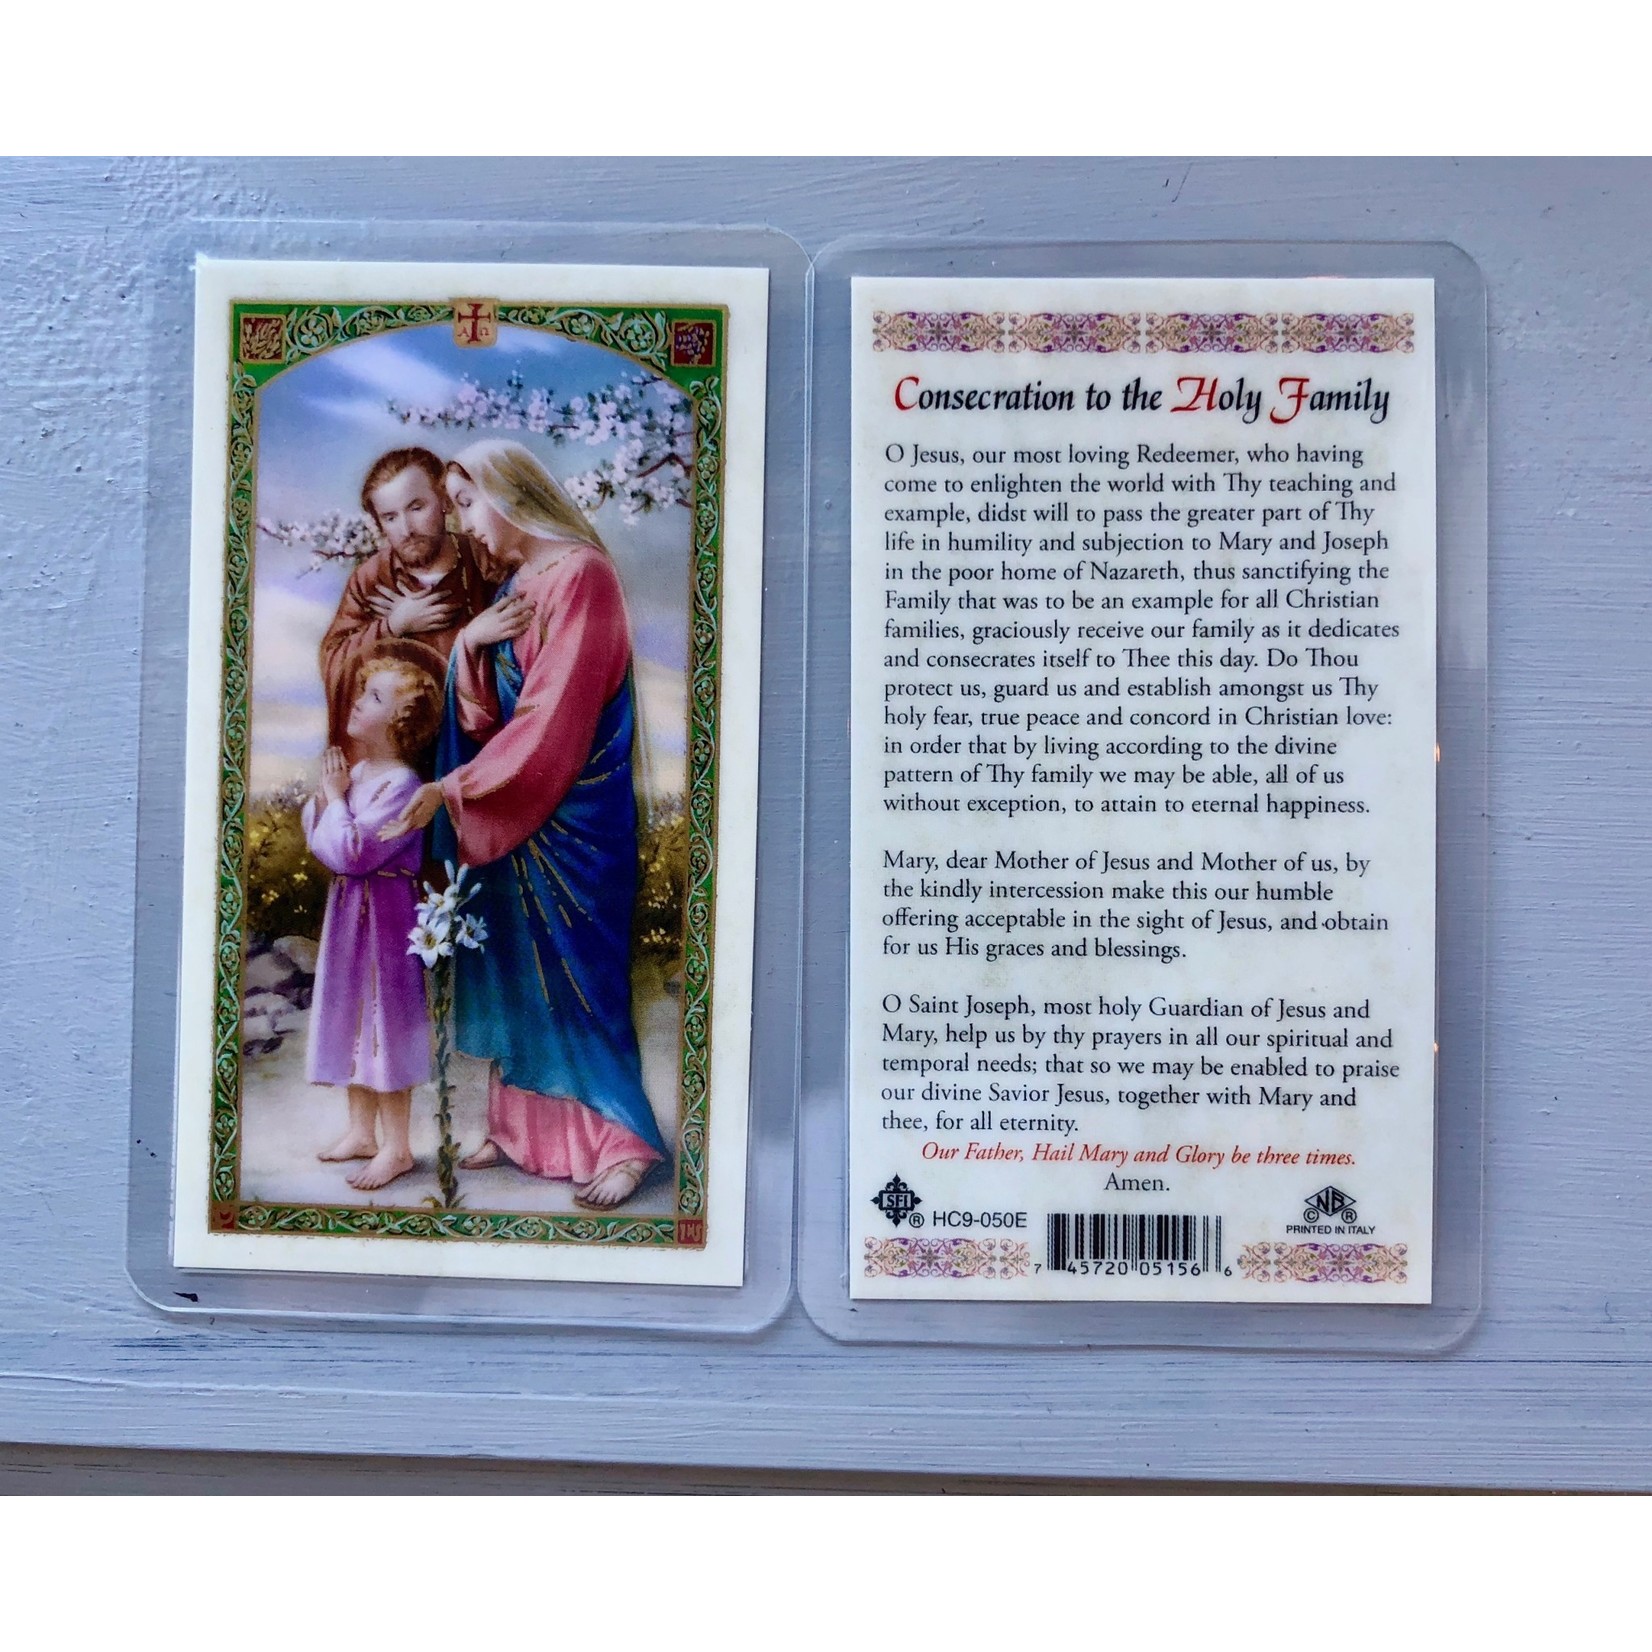 Prayer Card Consecration to the Holy Family